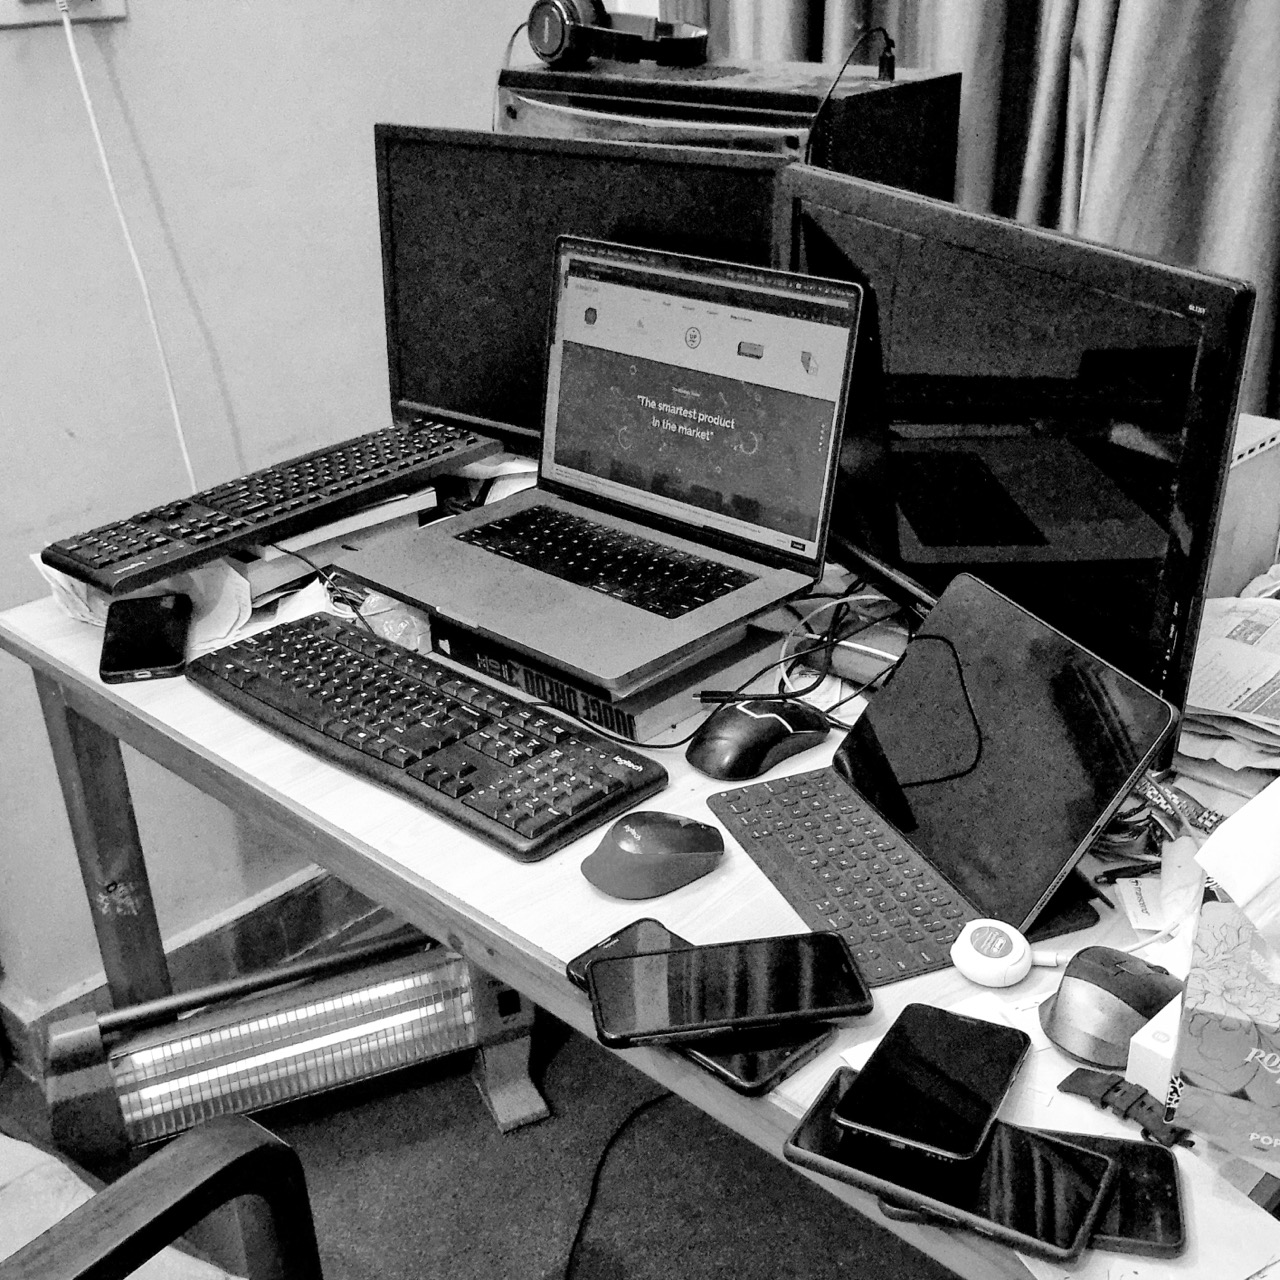 photo of my messy desk with a laptop, two 1080p displays, my desktop, too many phones, a first gen ppc macmini, and an electric heater.